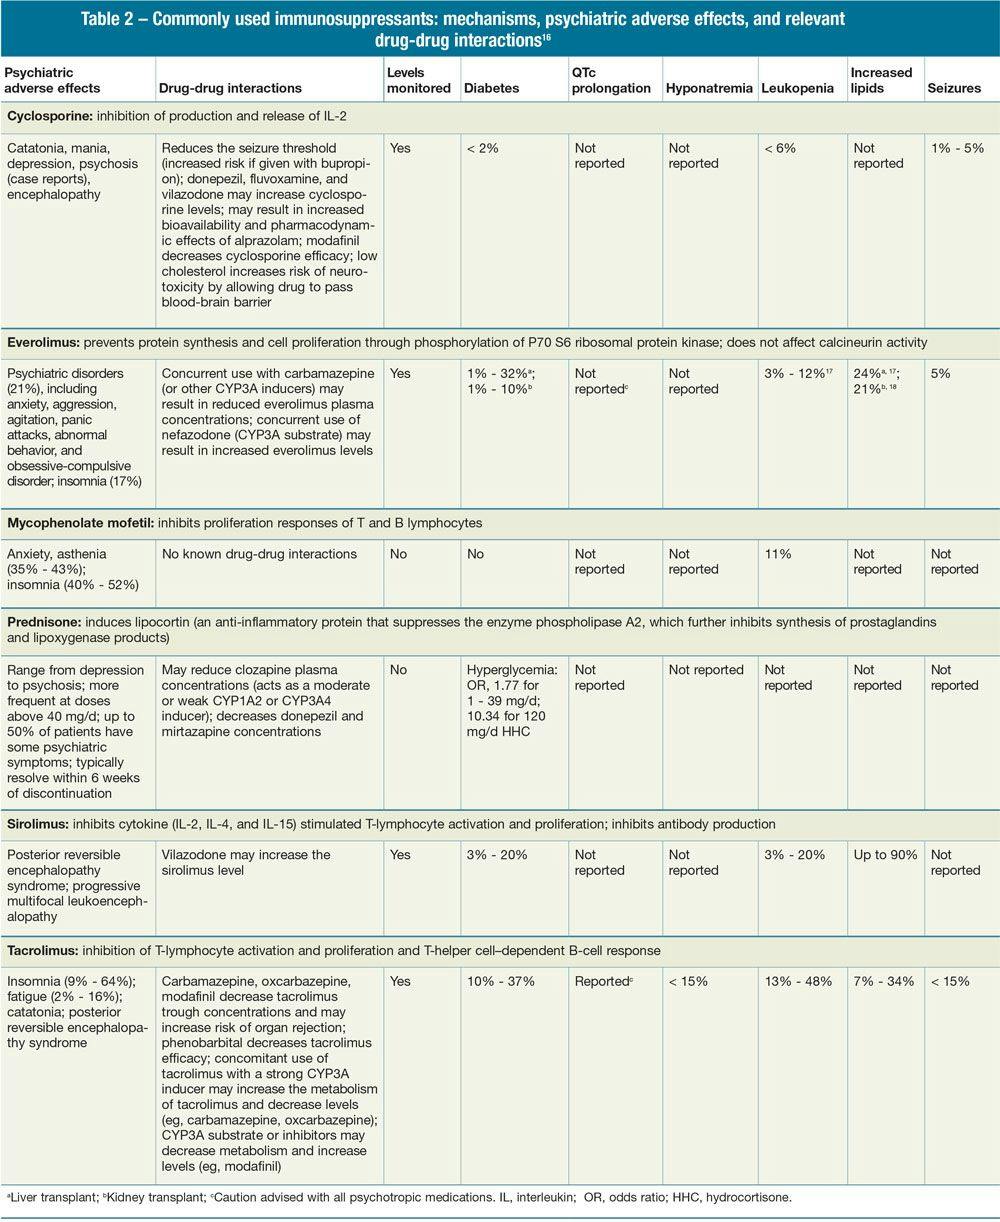 Commonly used immunosuppressants: mechanisms, psychiatric adverse effects